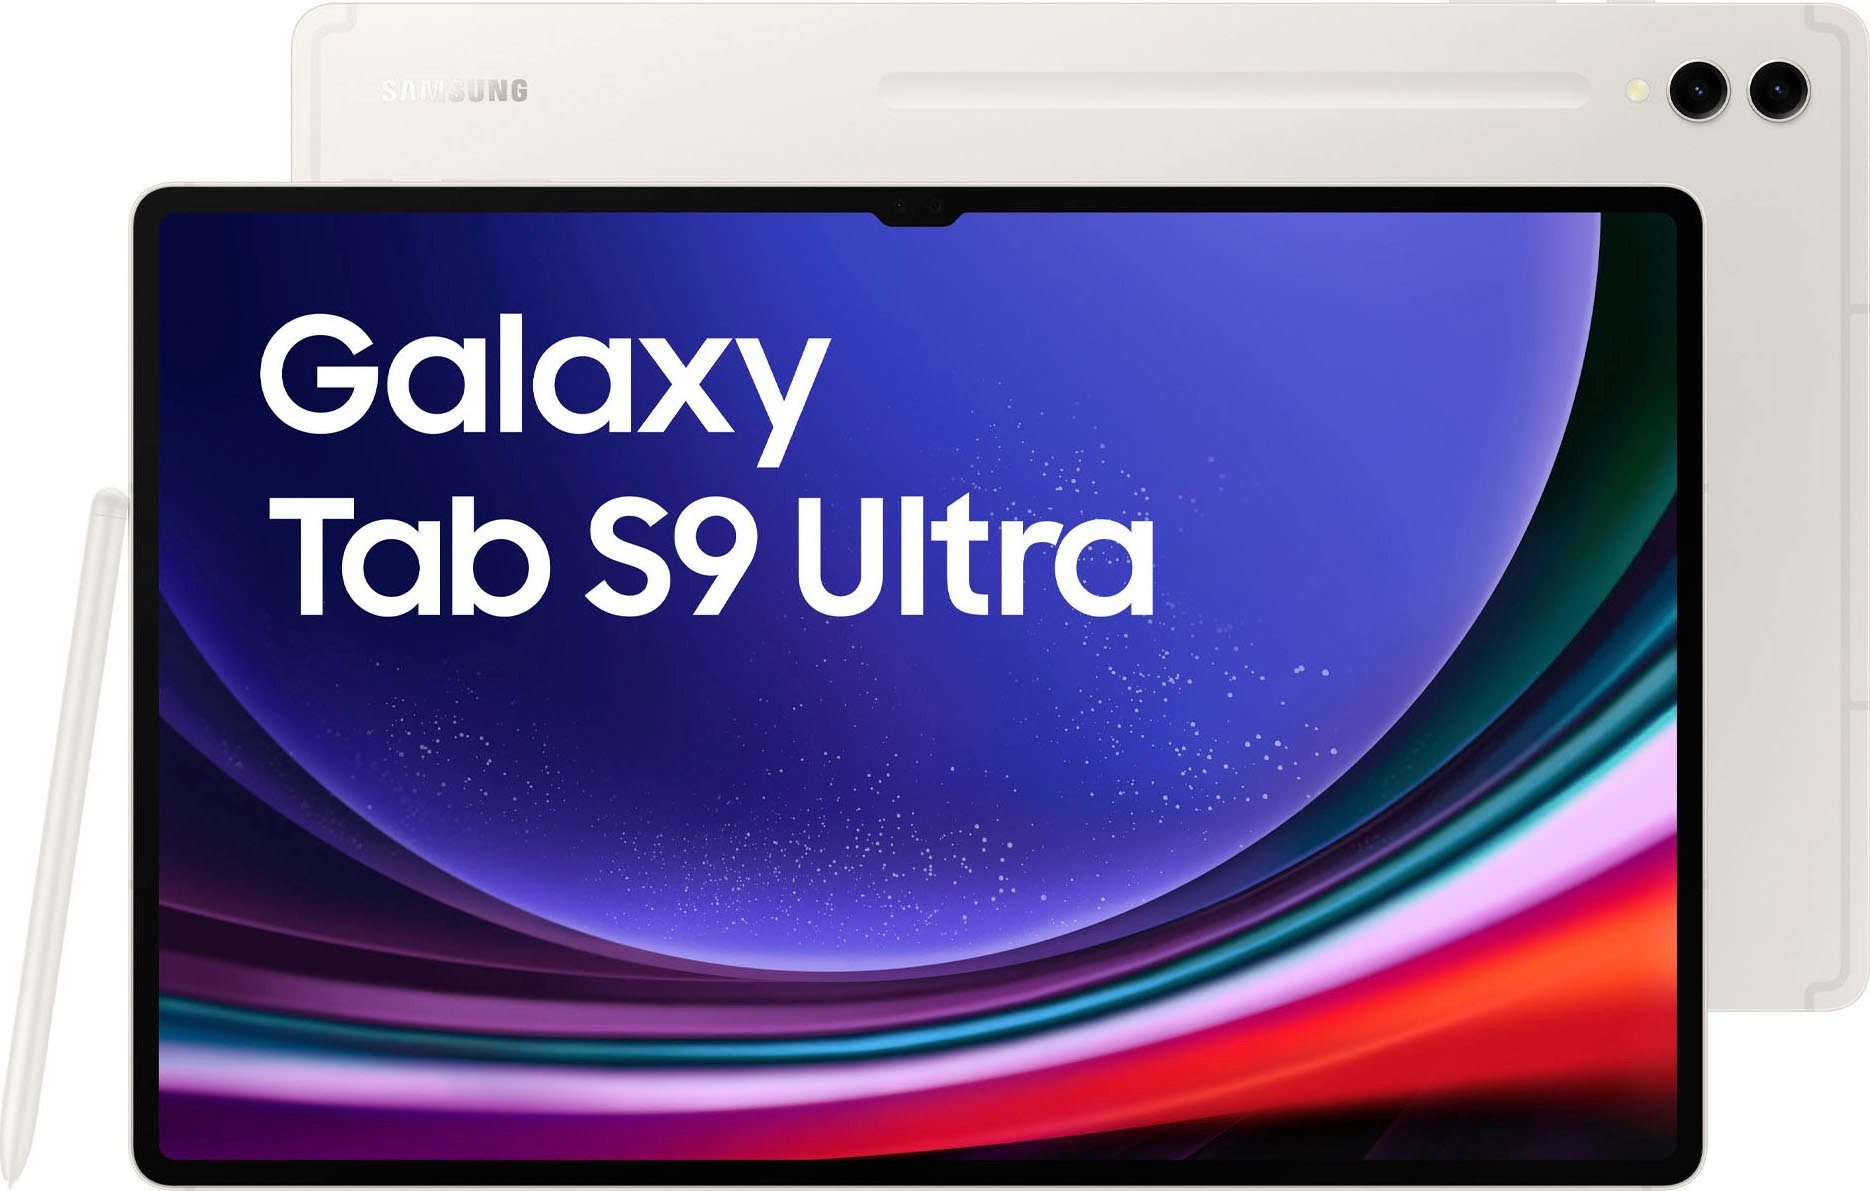 Galaxy 5G) Samsung GB, S9 Android, beige (14,6", Tab 5G Ultra Tablet 512